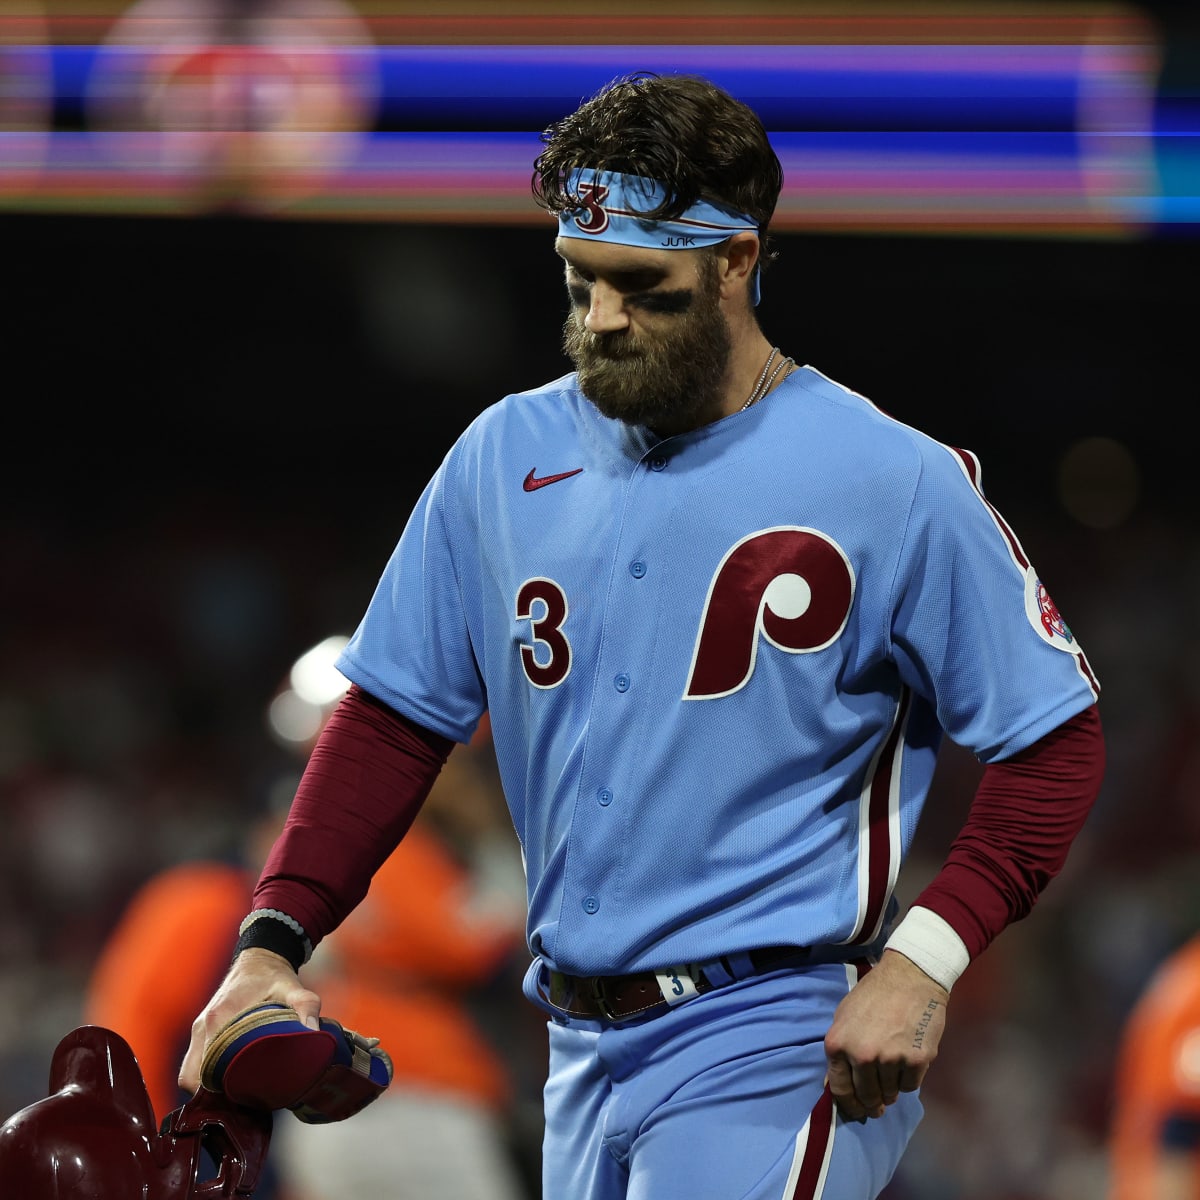 The Phillies appear to have phased out their red alternate jerseys -  sportstalkphilly - News, rumors, game coverage of the Philadelphia Eagles,  Philadelphia Phillies, Philadelphia Flyers, and Philadelphia 76ers